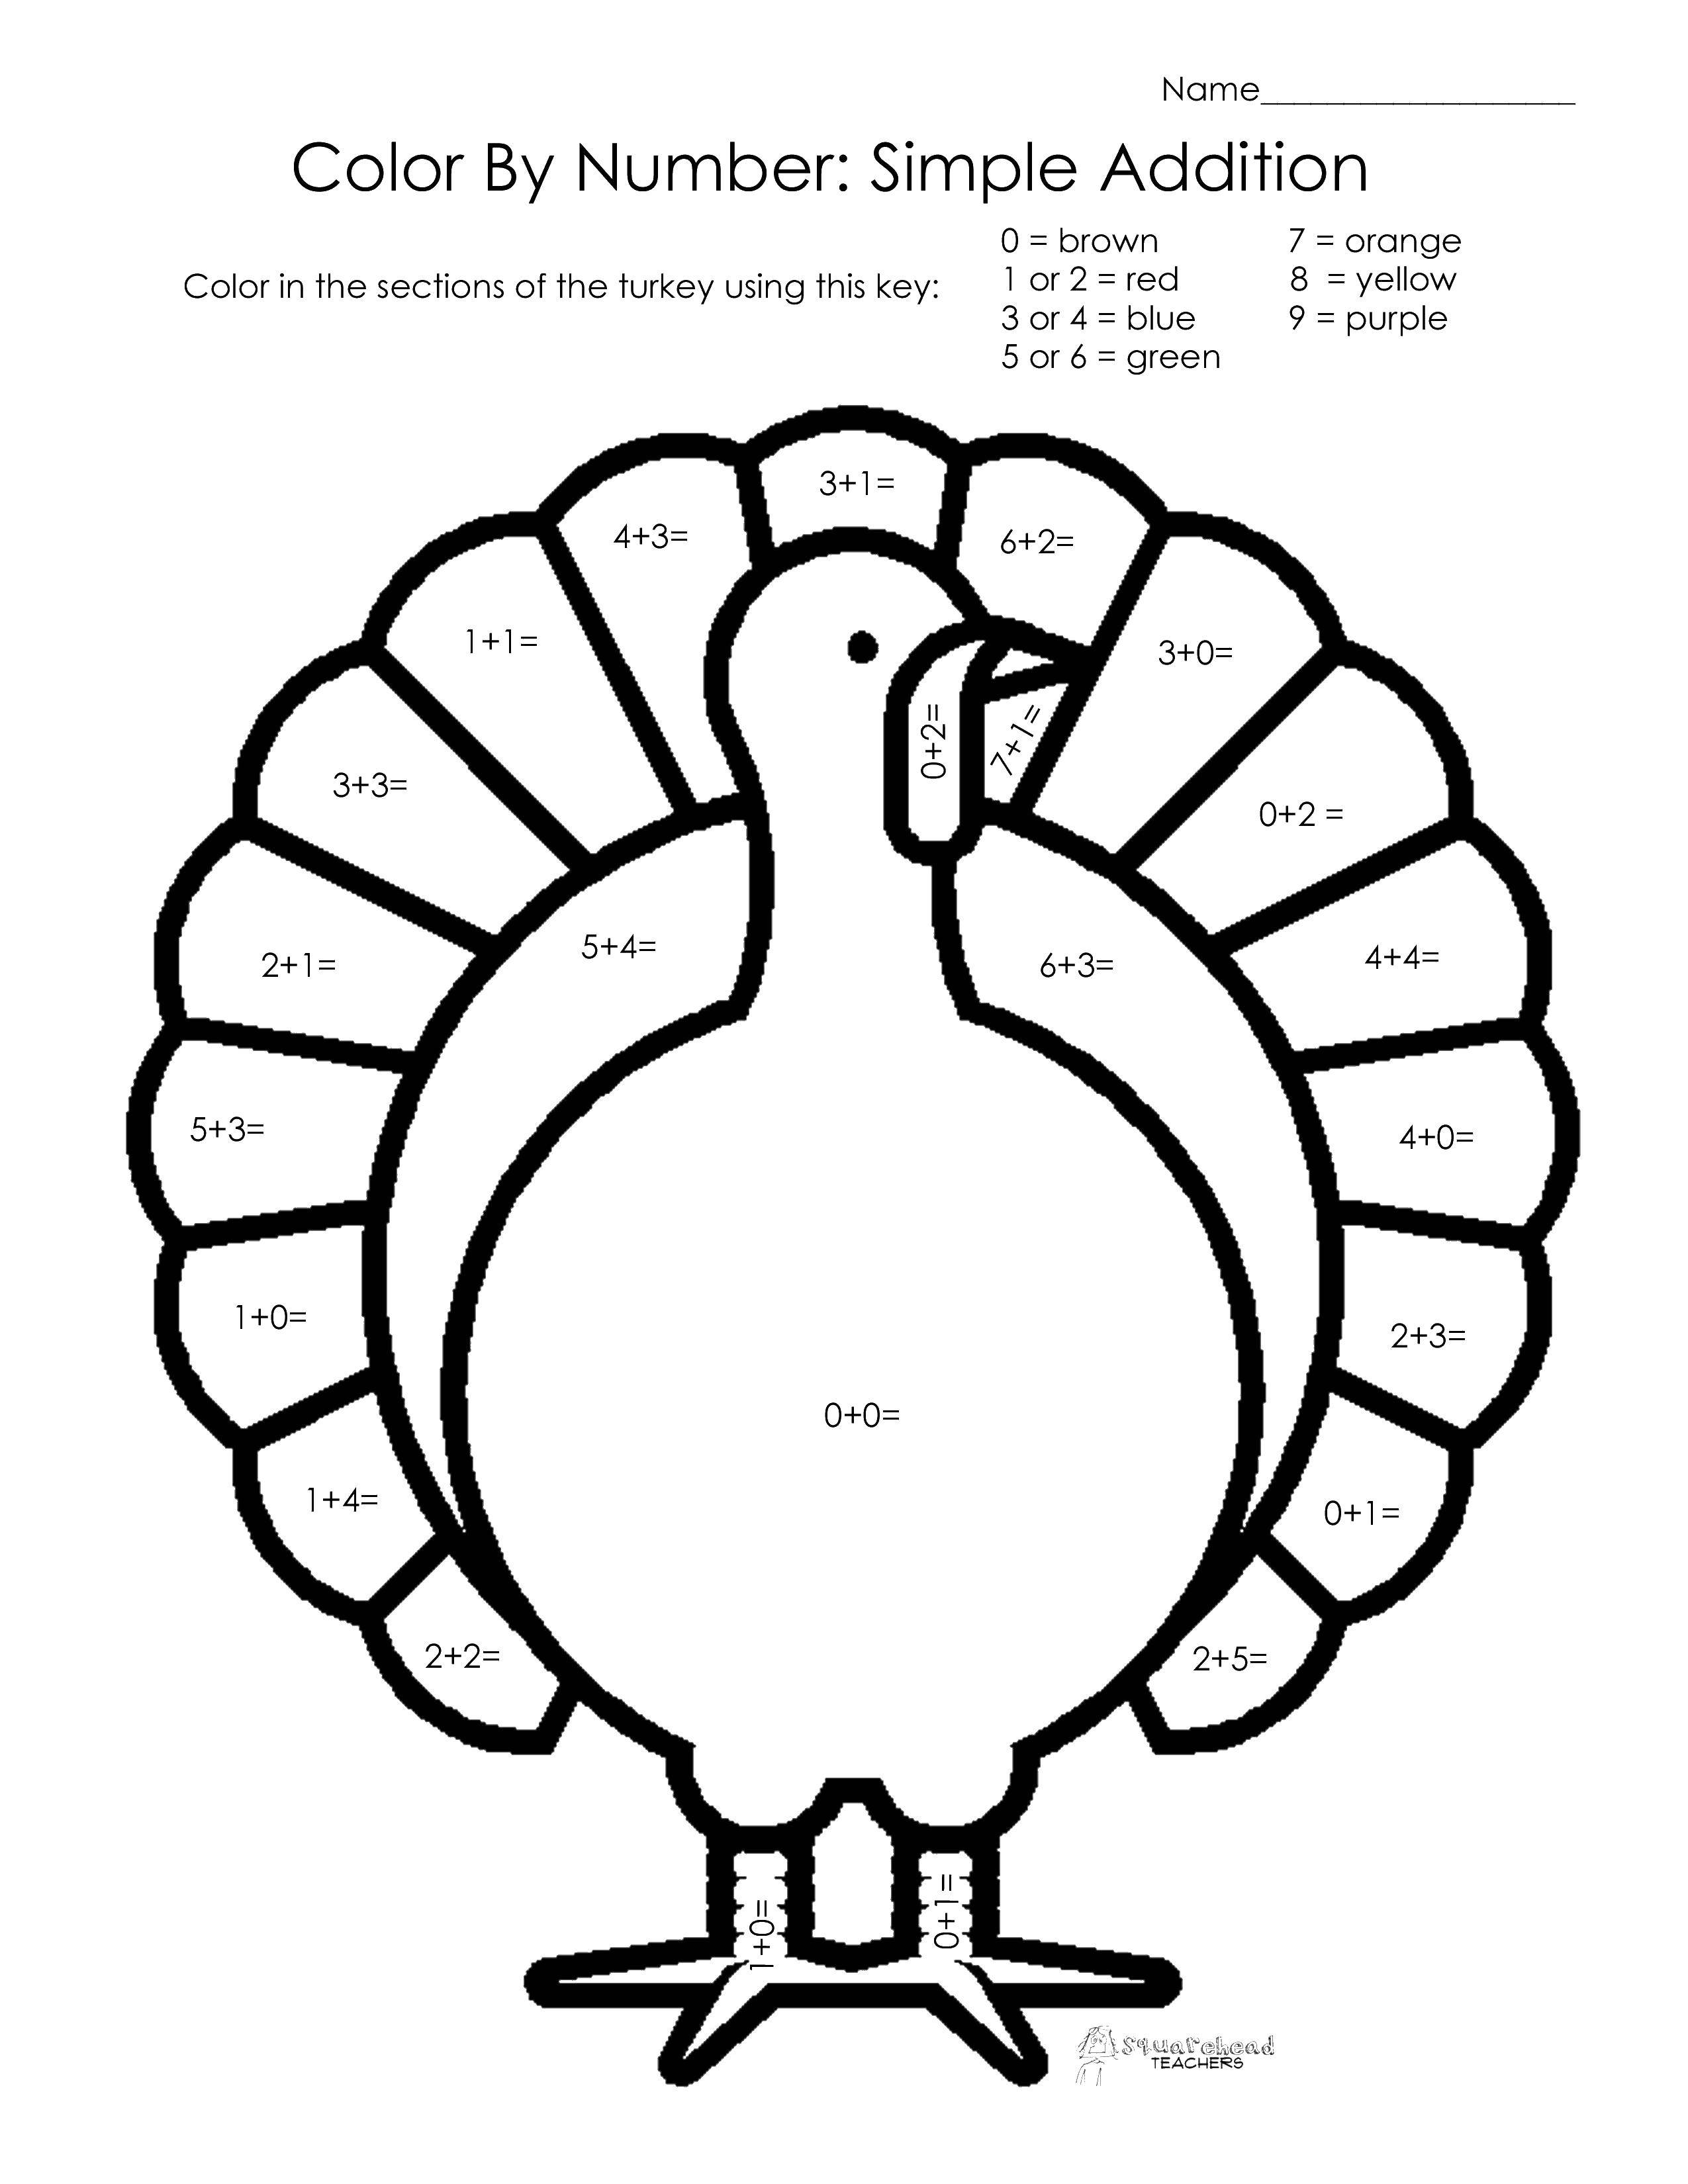 Coloring Color the Turkey by numbers. Category That number. Tags:  by numbers, Turkey.